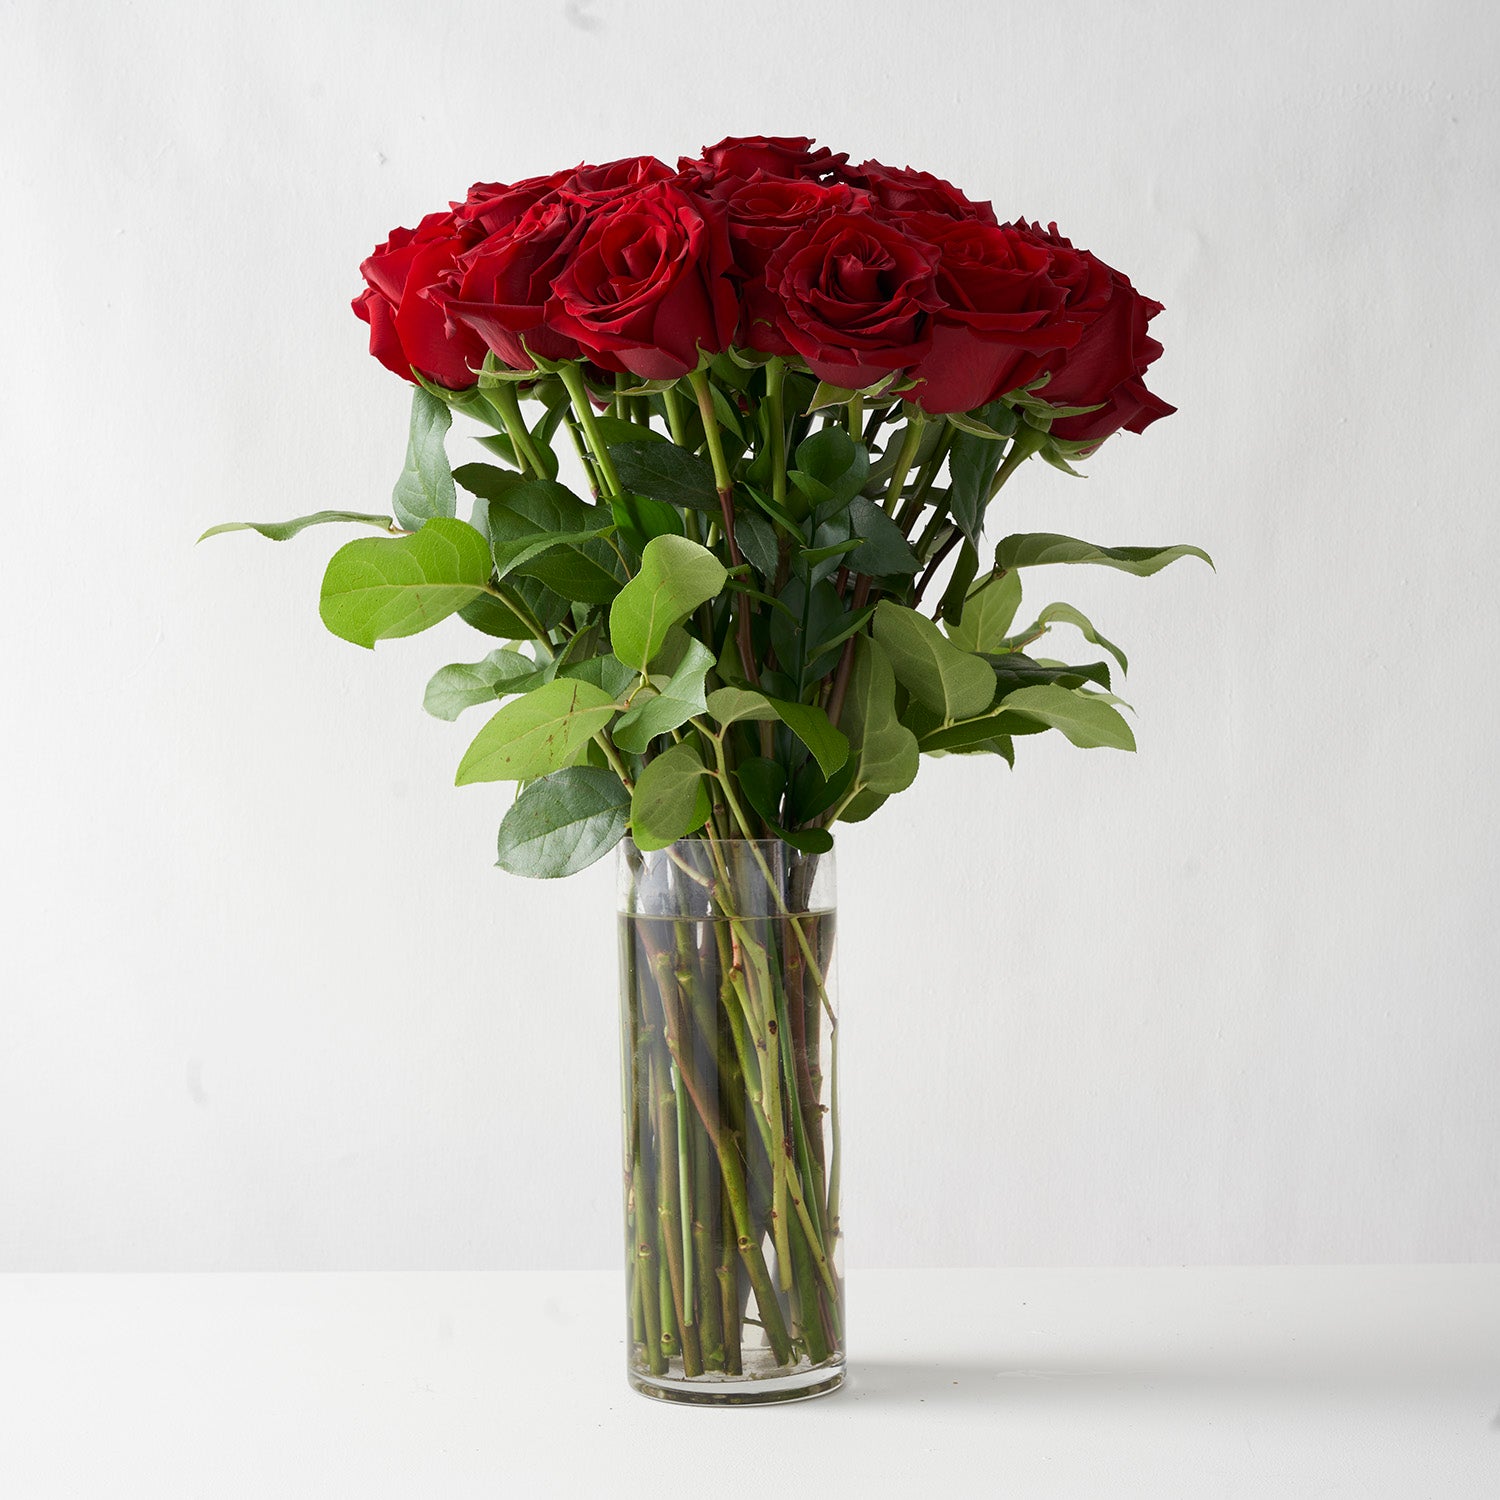 twenty-four red roses with green leaves in clear glass vase.